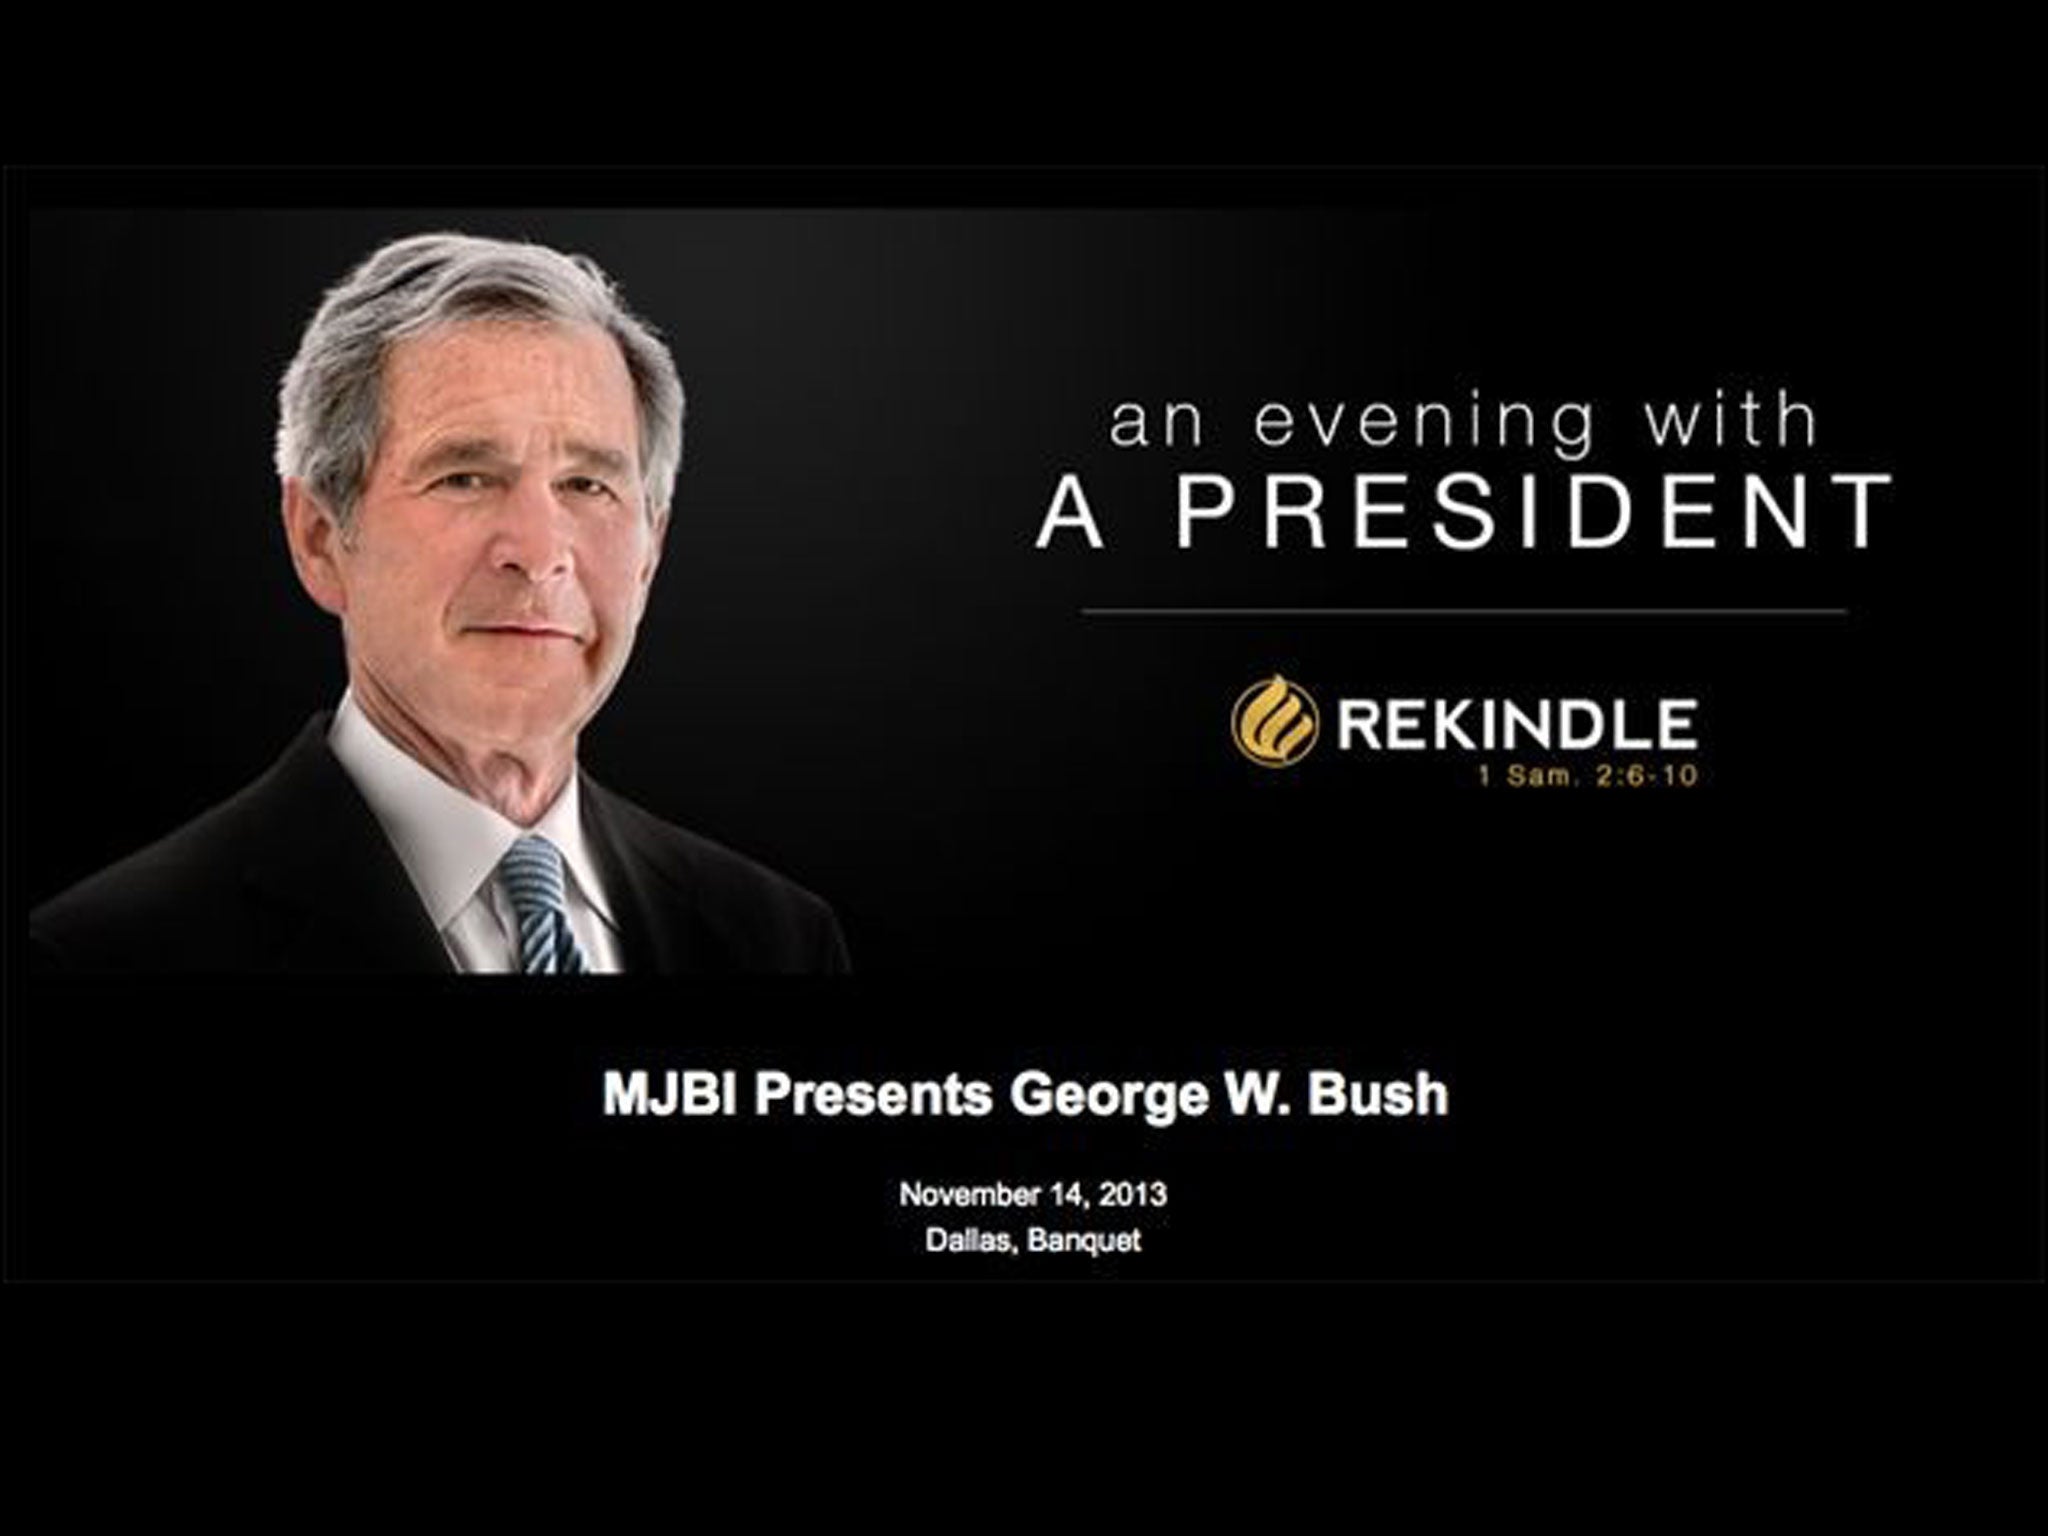 Tickets for the Bush address are available for up to $100,000